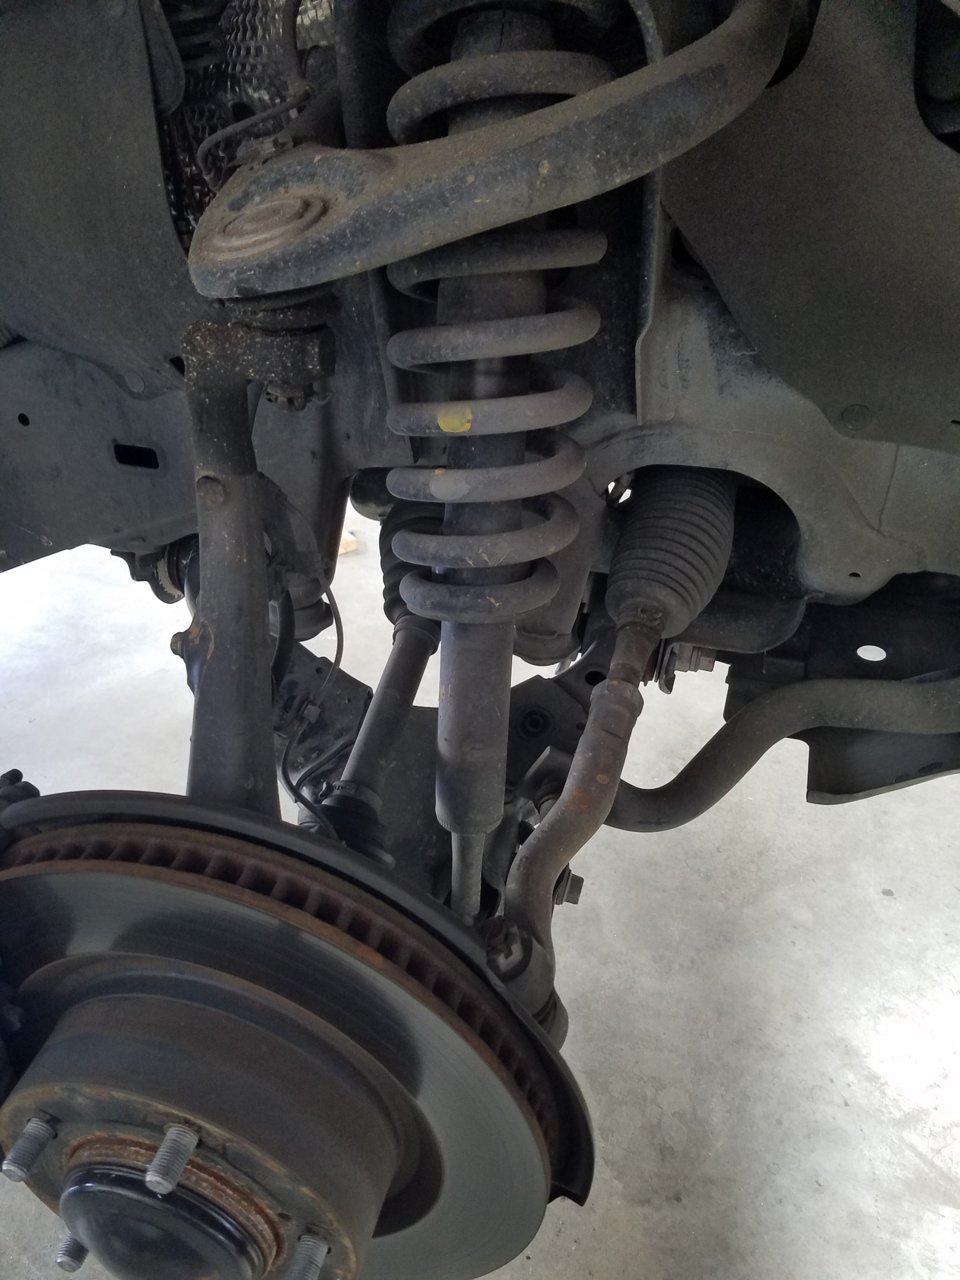 TRD Pro shocks and coilovers | Toyota Tundra Forum